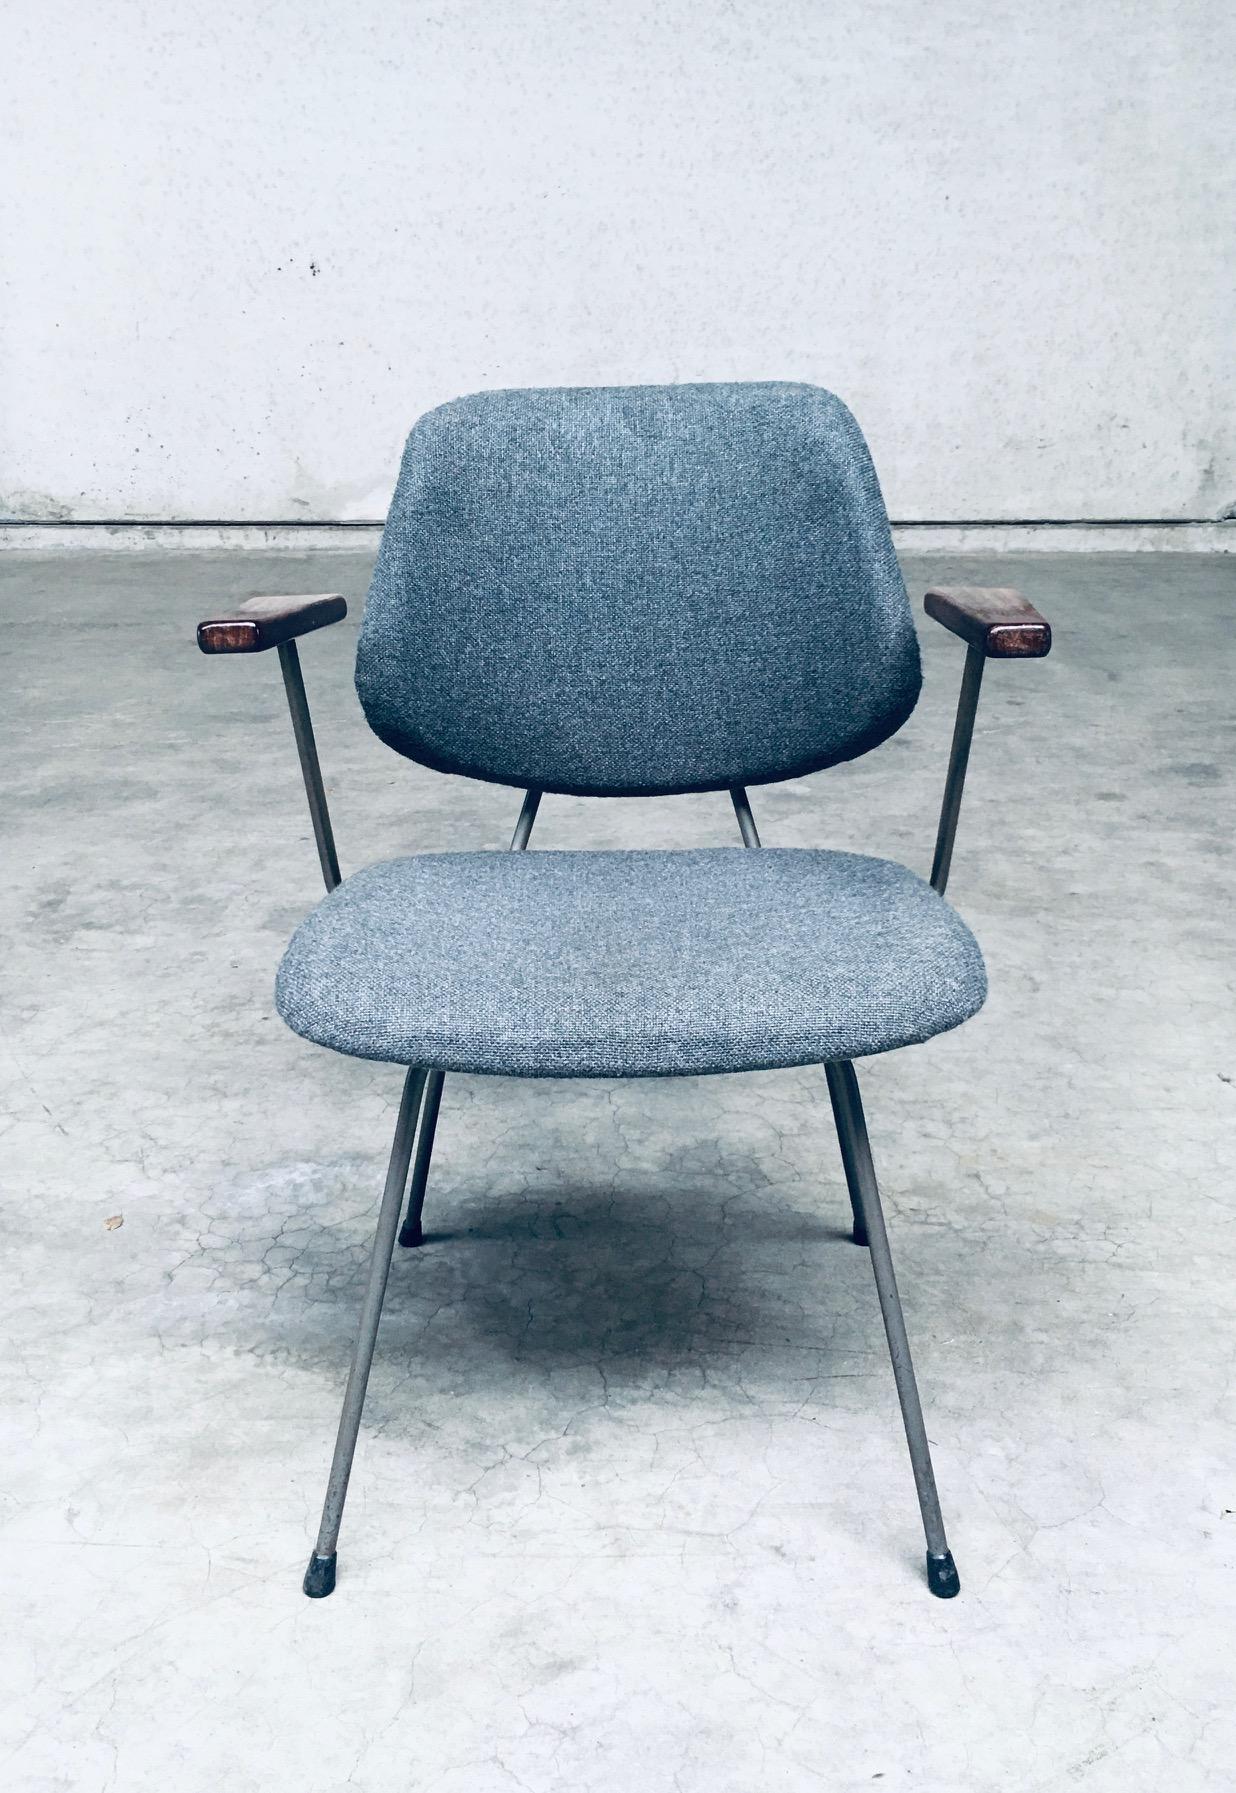 Midcentury Modern Design Office Chair set by Wim Rietveld for Kembo, 1950's For Sale 3